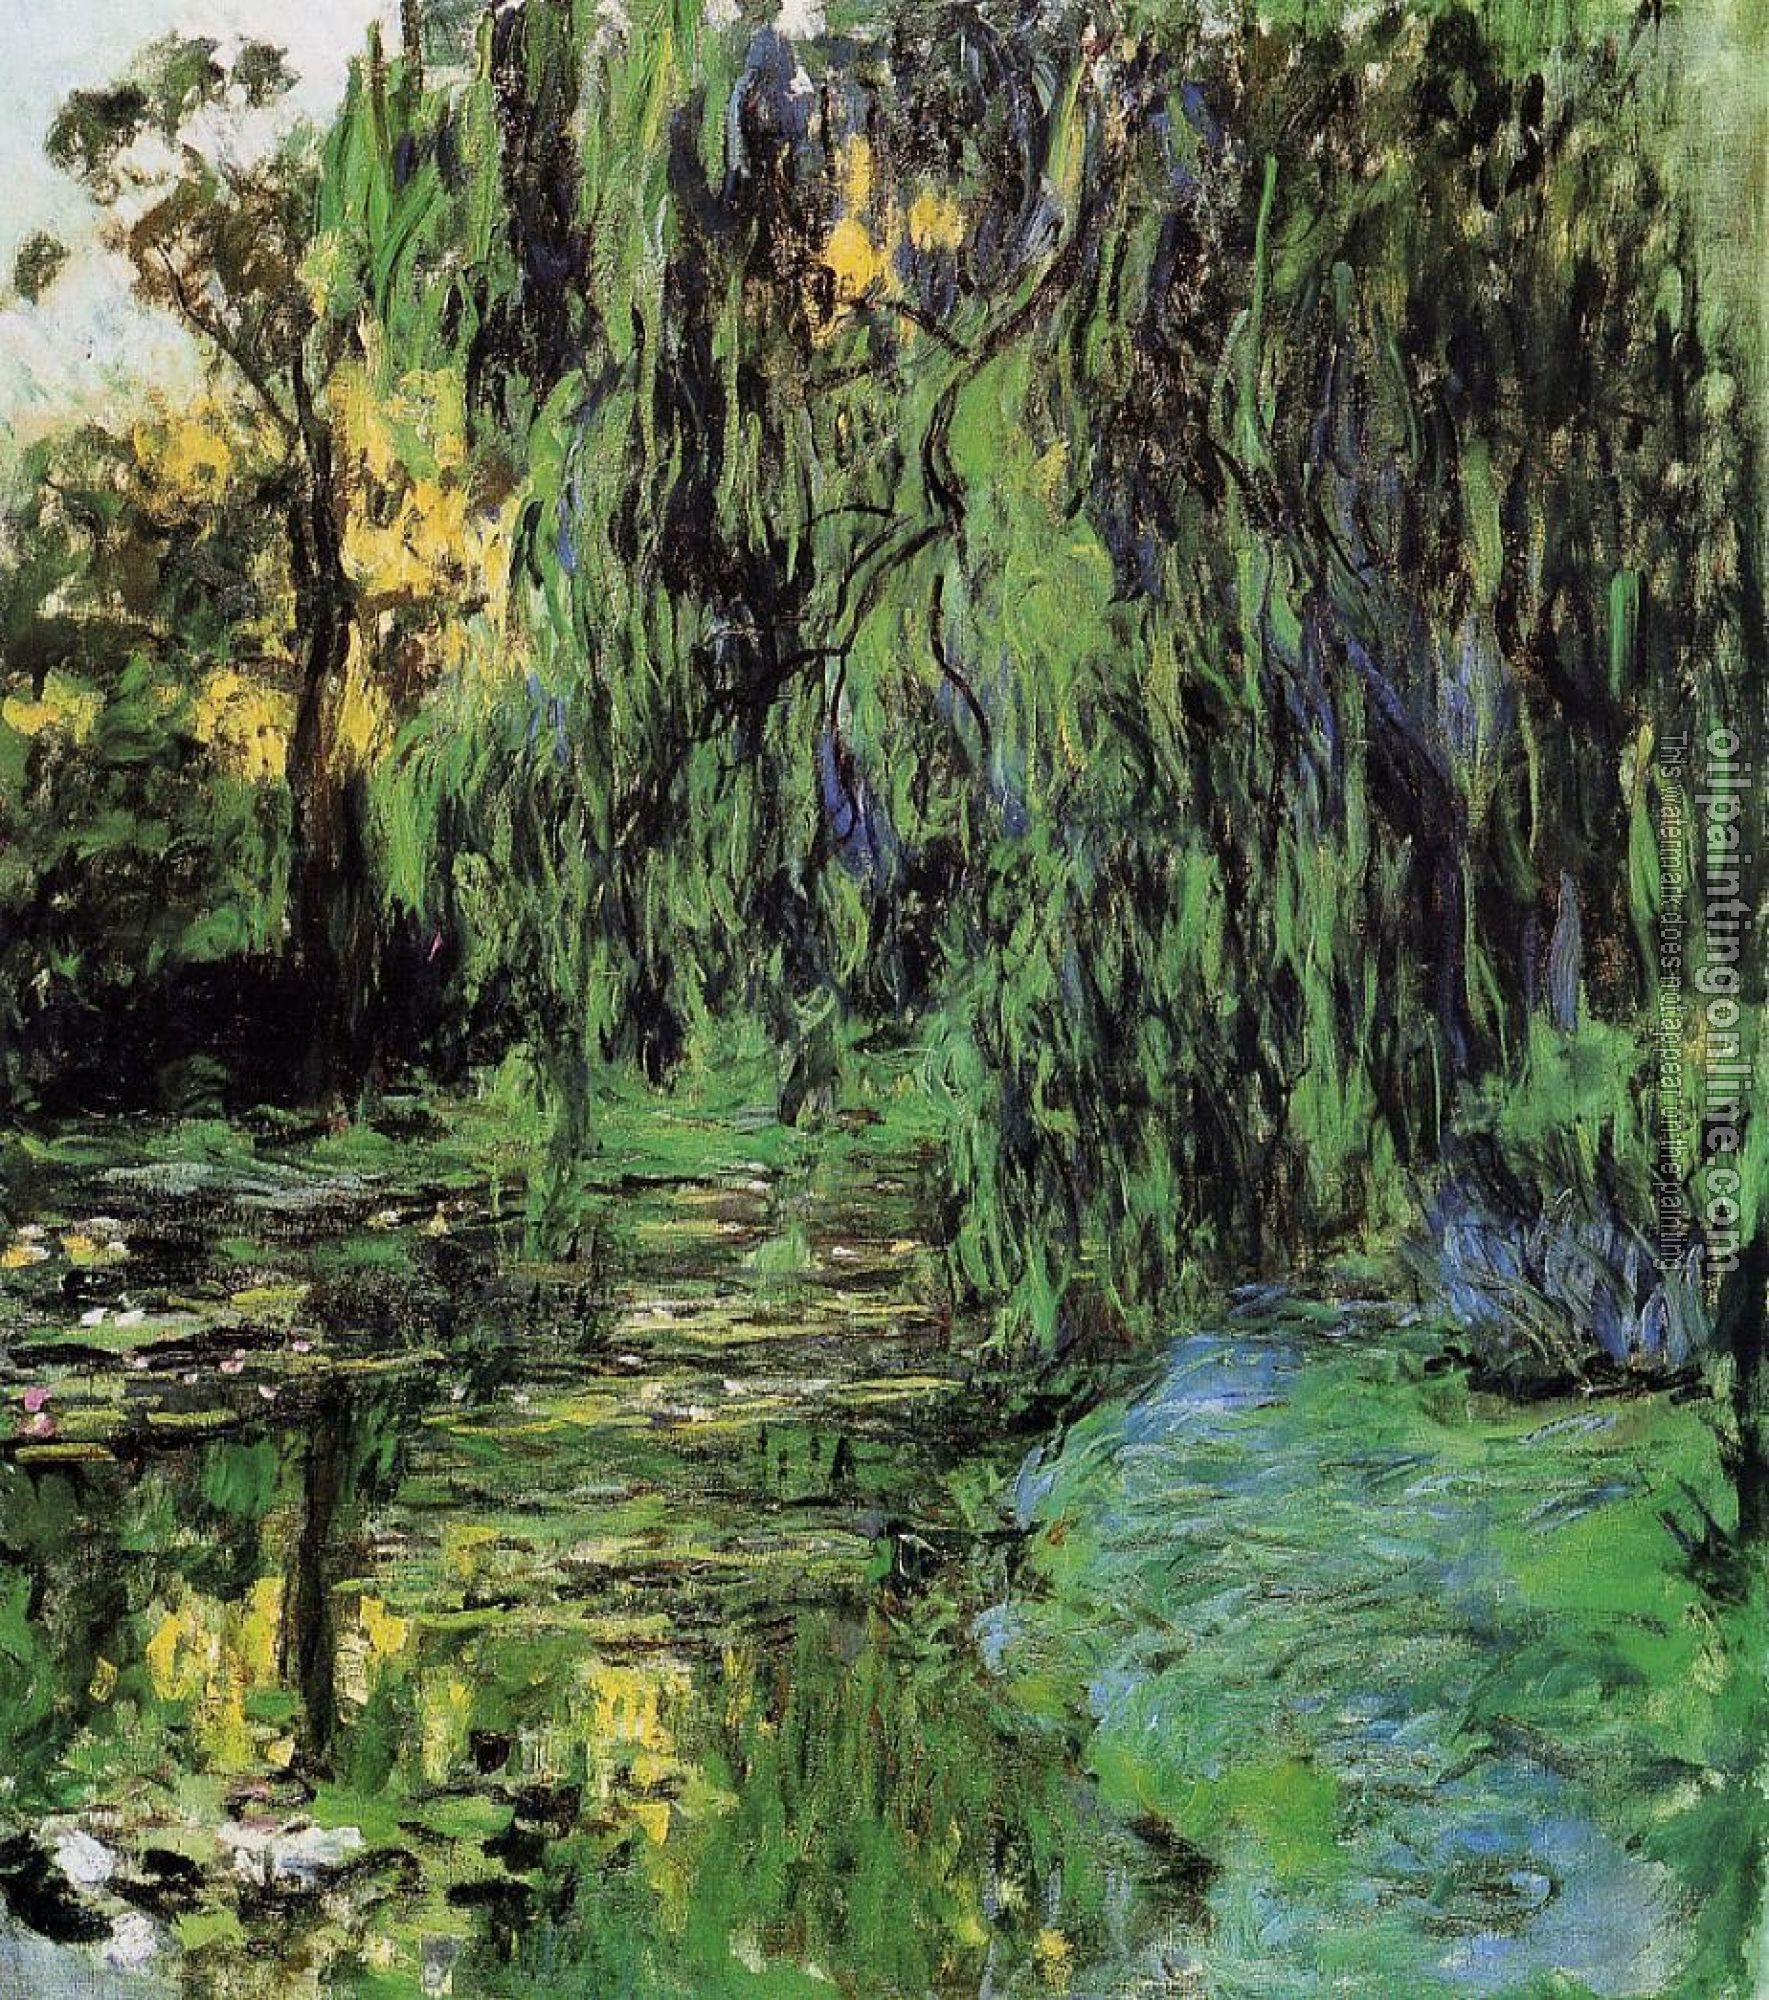 Monet, Claude Oscar - Weeping Willow and Water-Lily Pond